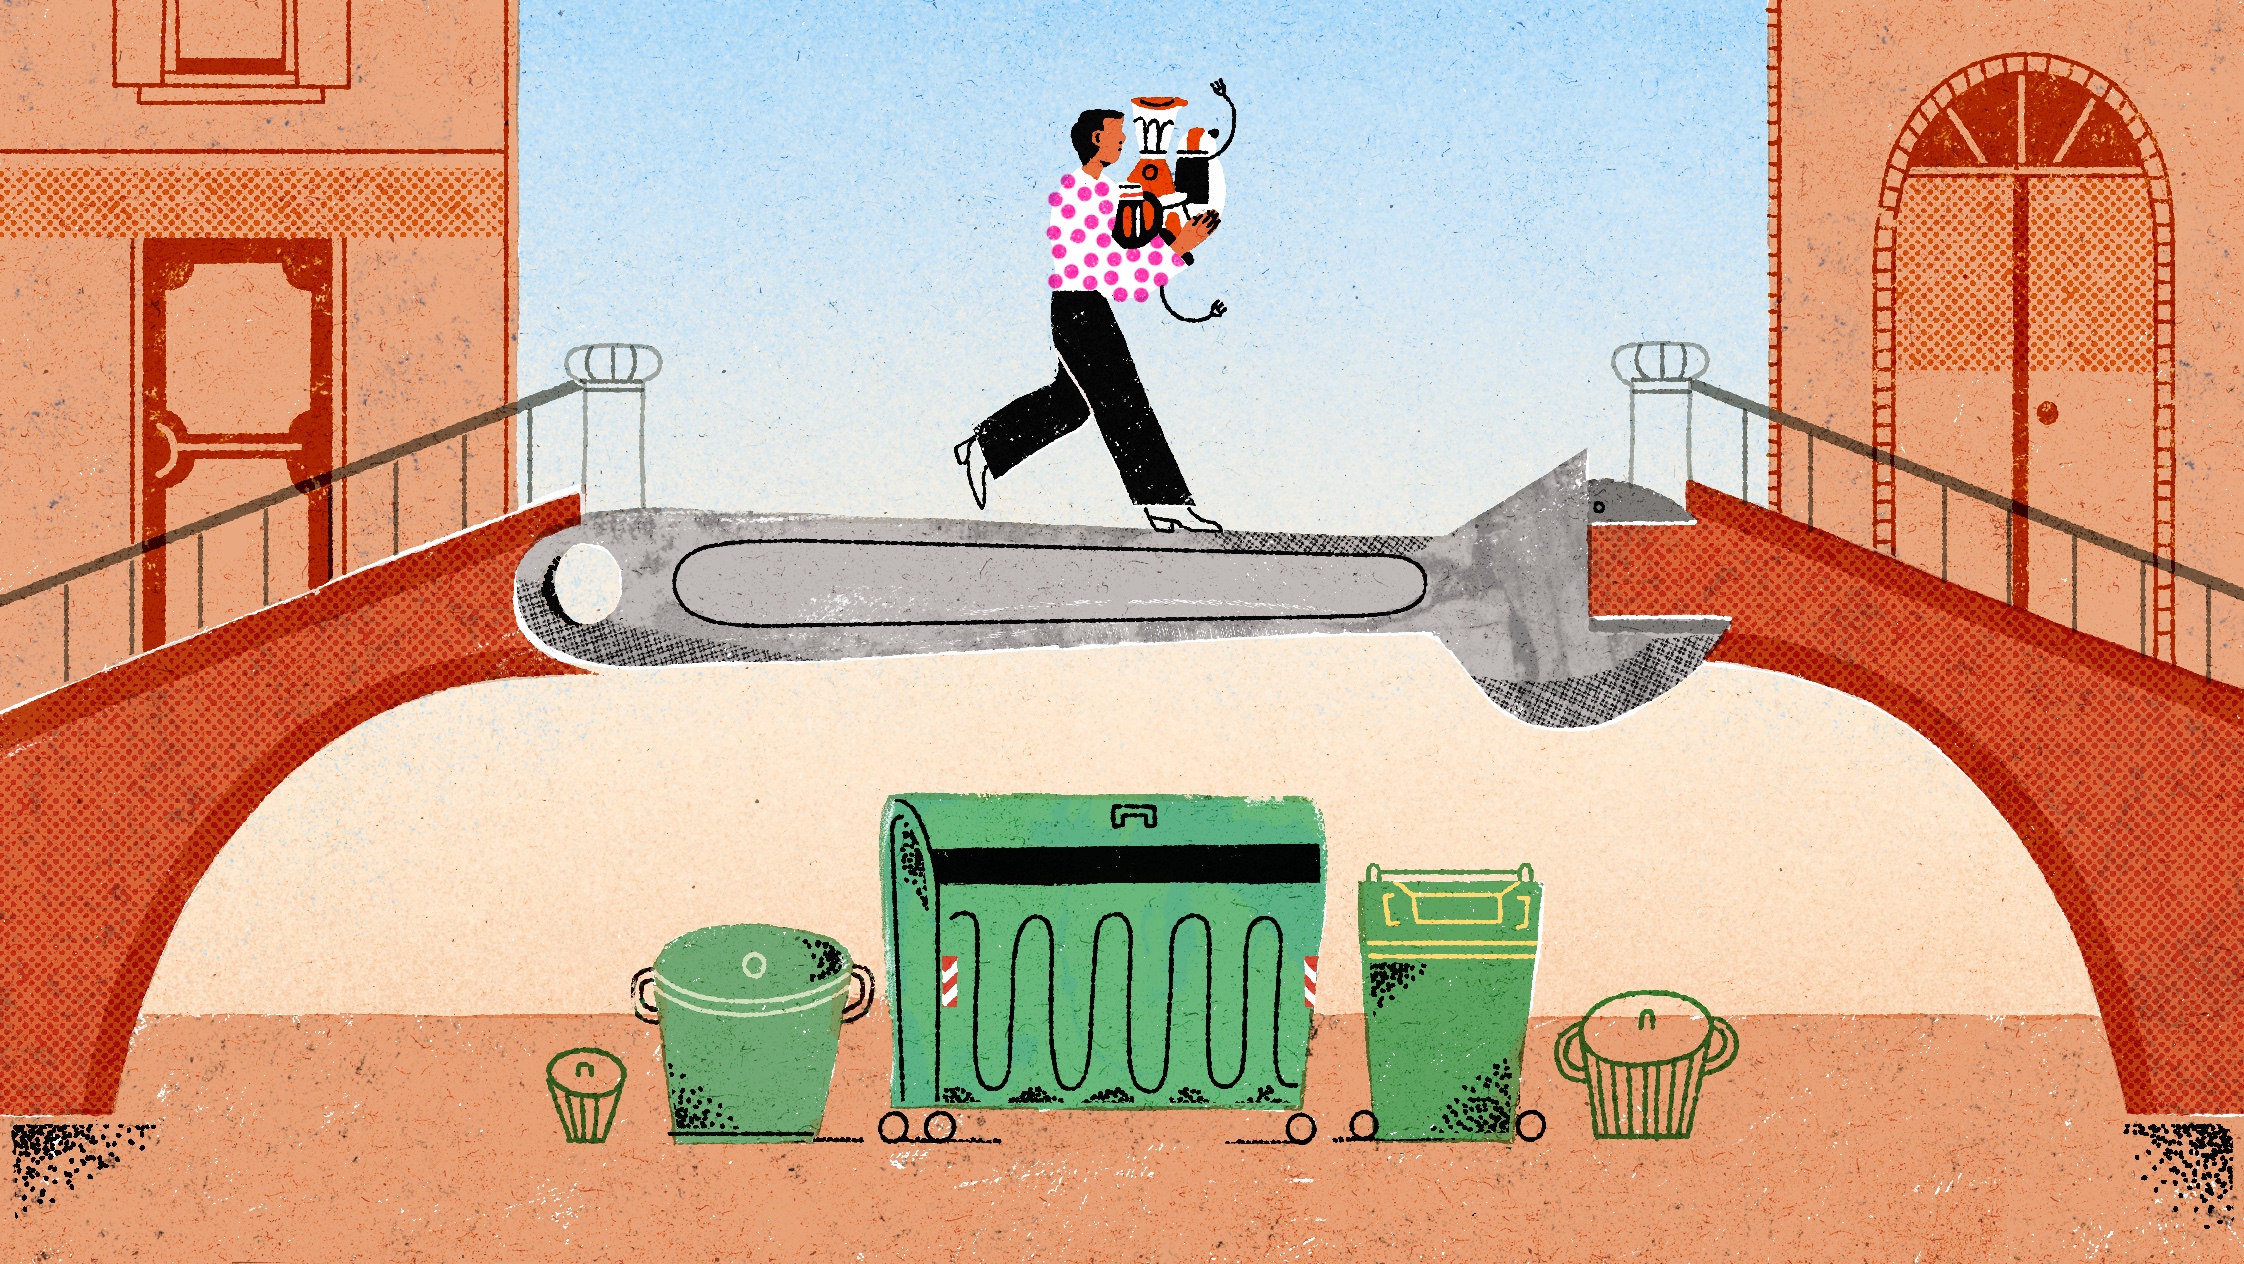 A colorful illustration shows a person carrying an armful of kitchen appliances over a wrench-shaped bridge between two buildings. Underneath the bridge are trash cans and a green dumpster. 